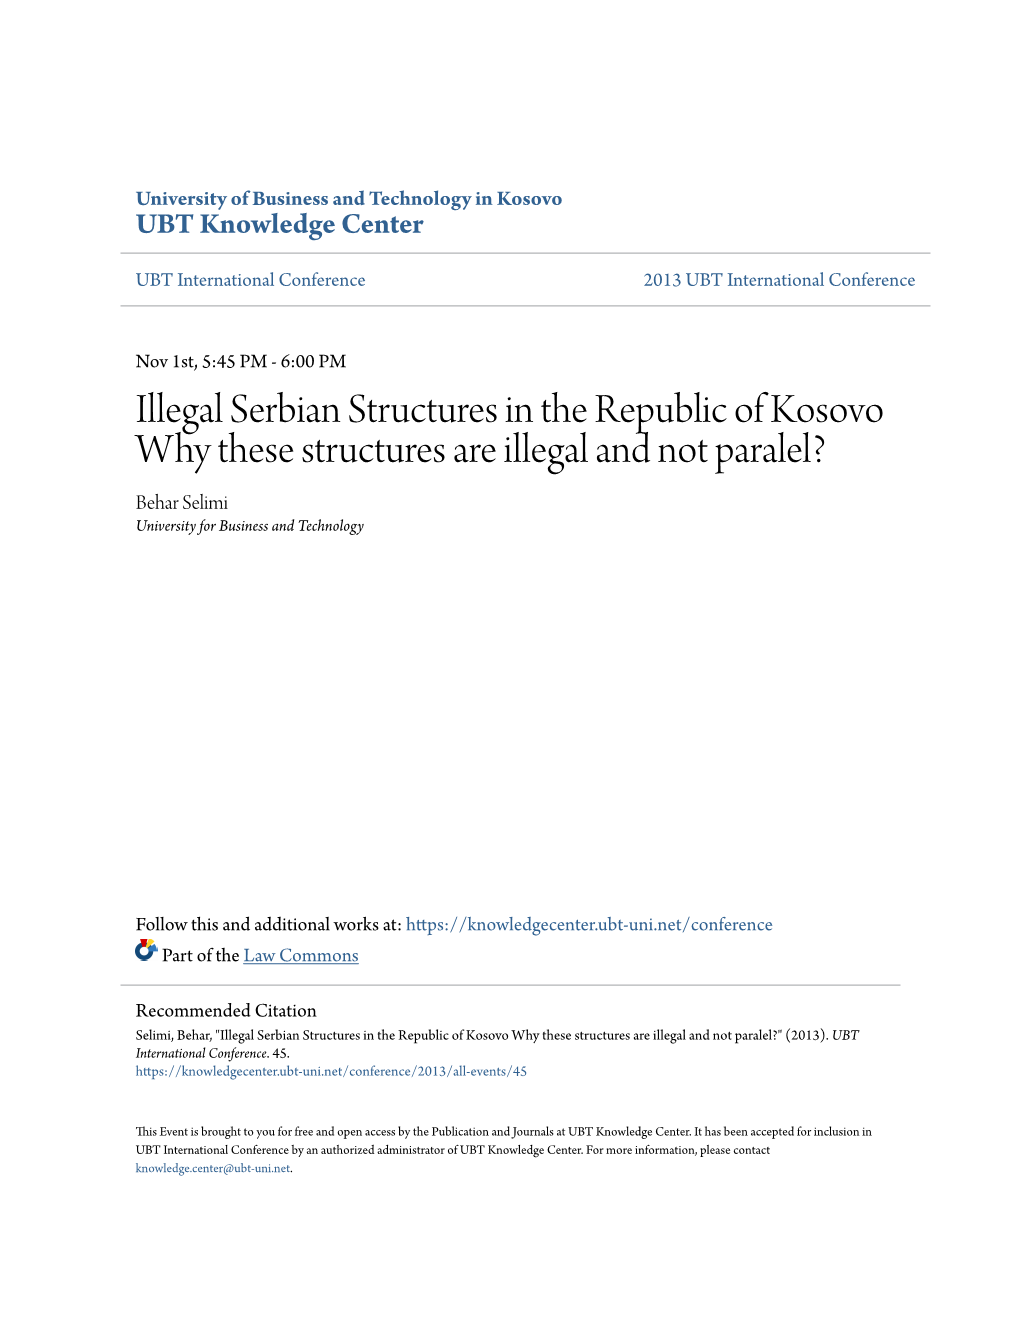 Illegal Serbian Structures in the Republic of Kosovo Why These Structures Are Illegal and Not Paralel? Behar Selimi University for Business and Technology